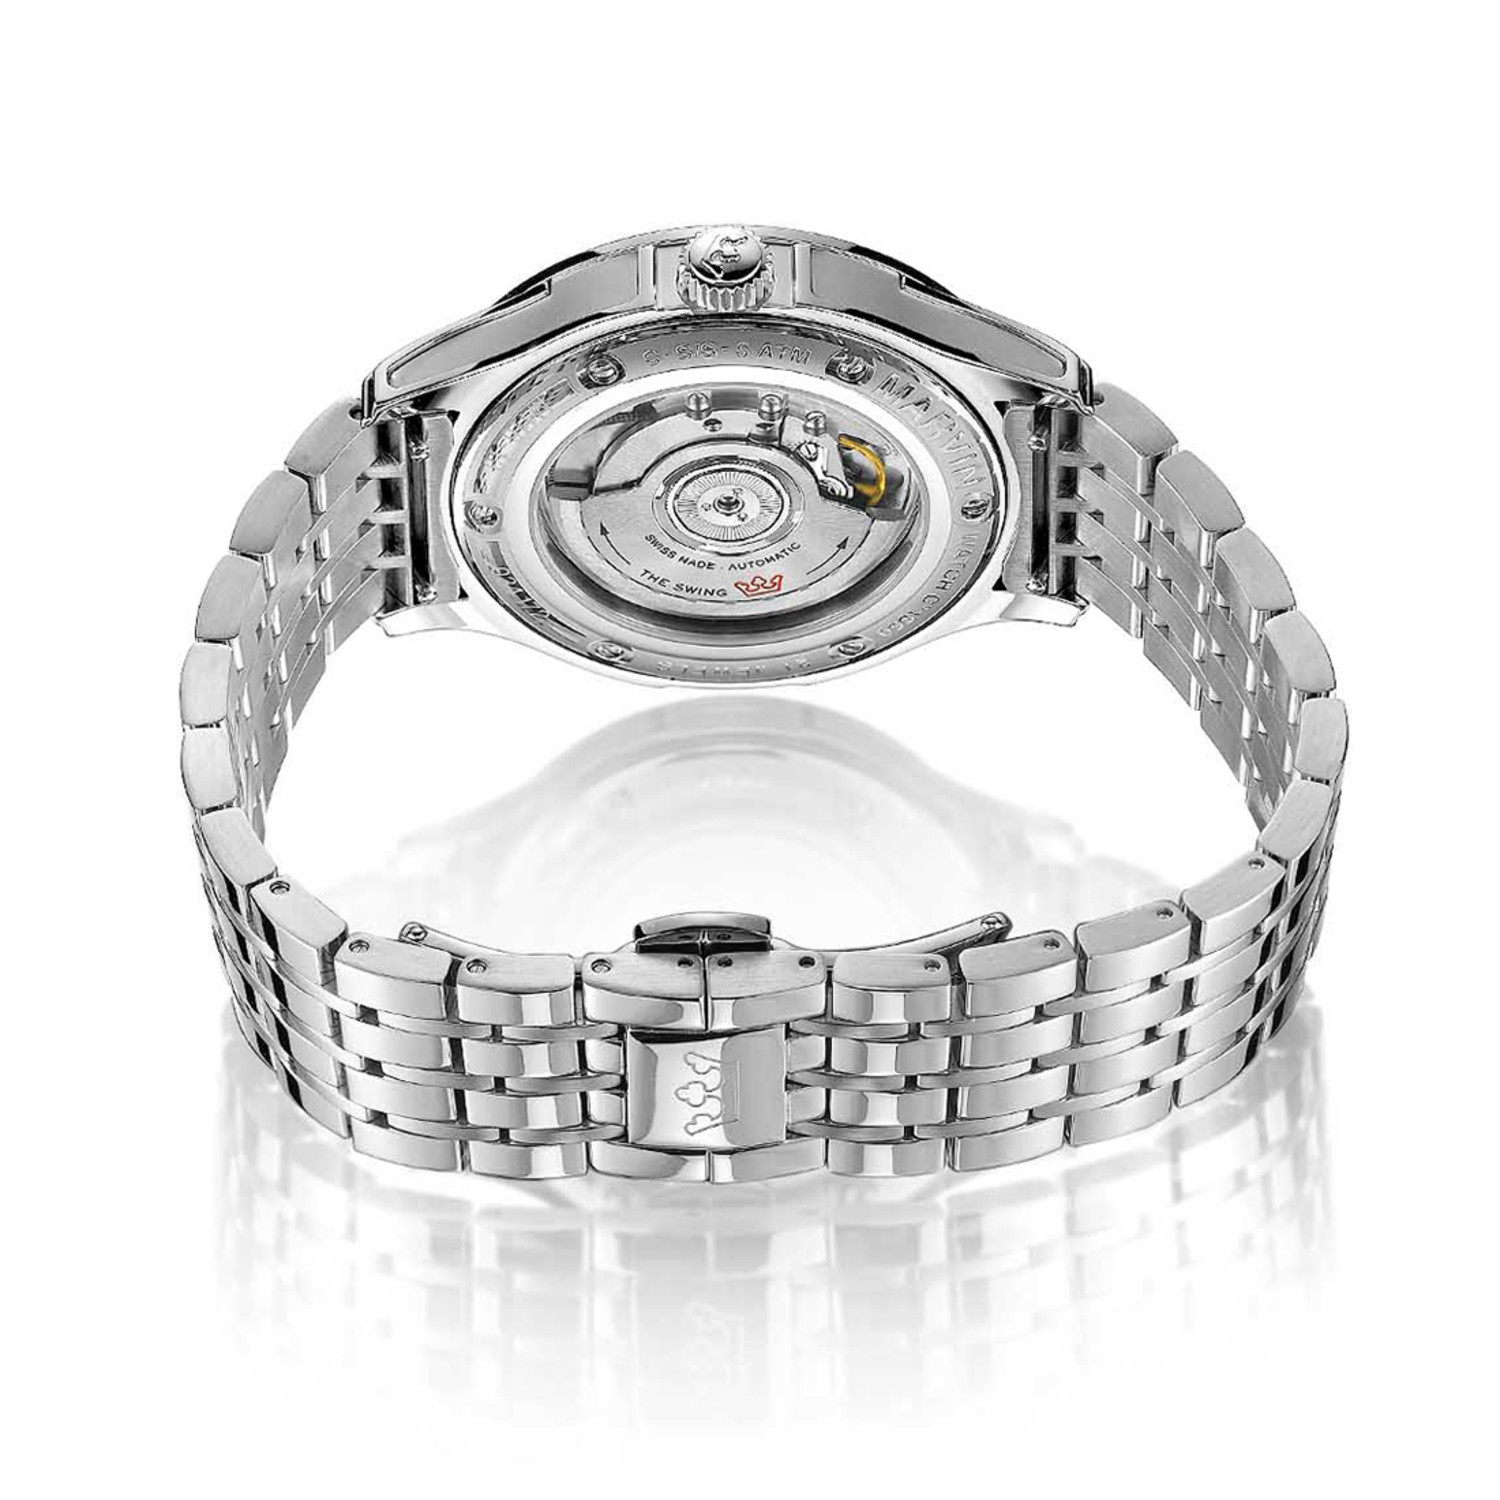 Marvin Automatic // M117.12.22.11 - Marvin Watches - Touch of Modern